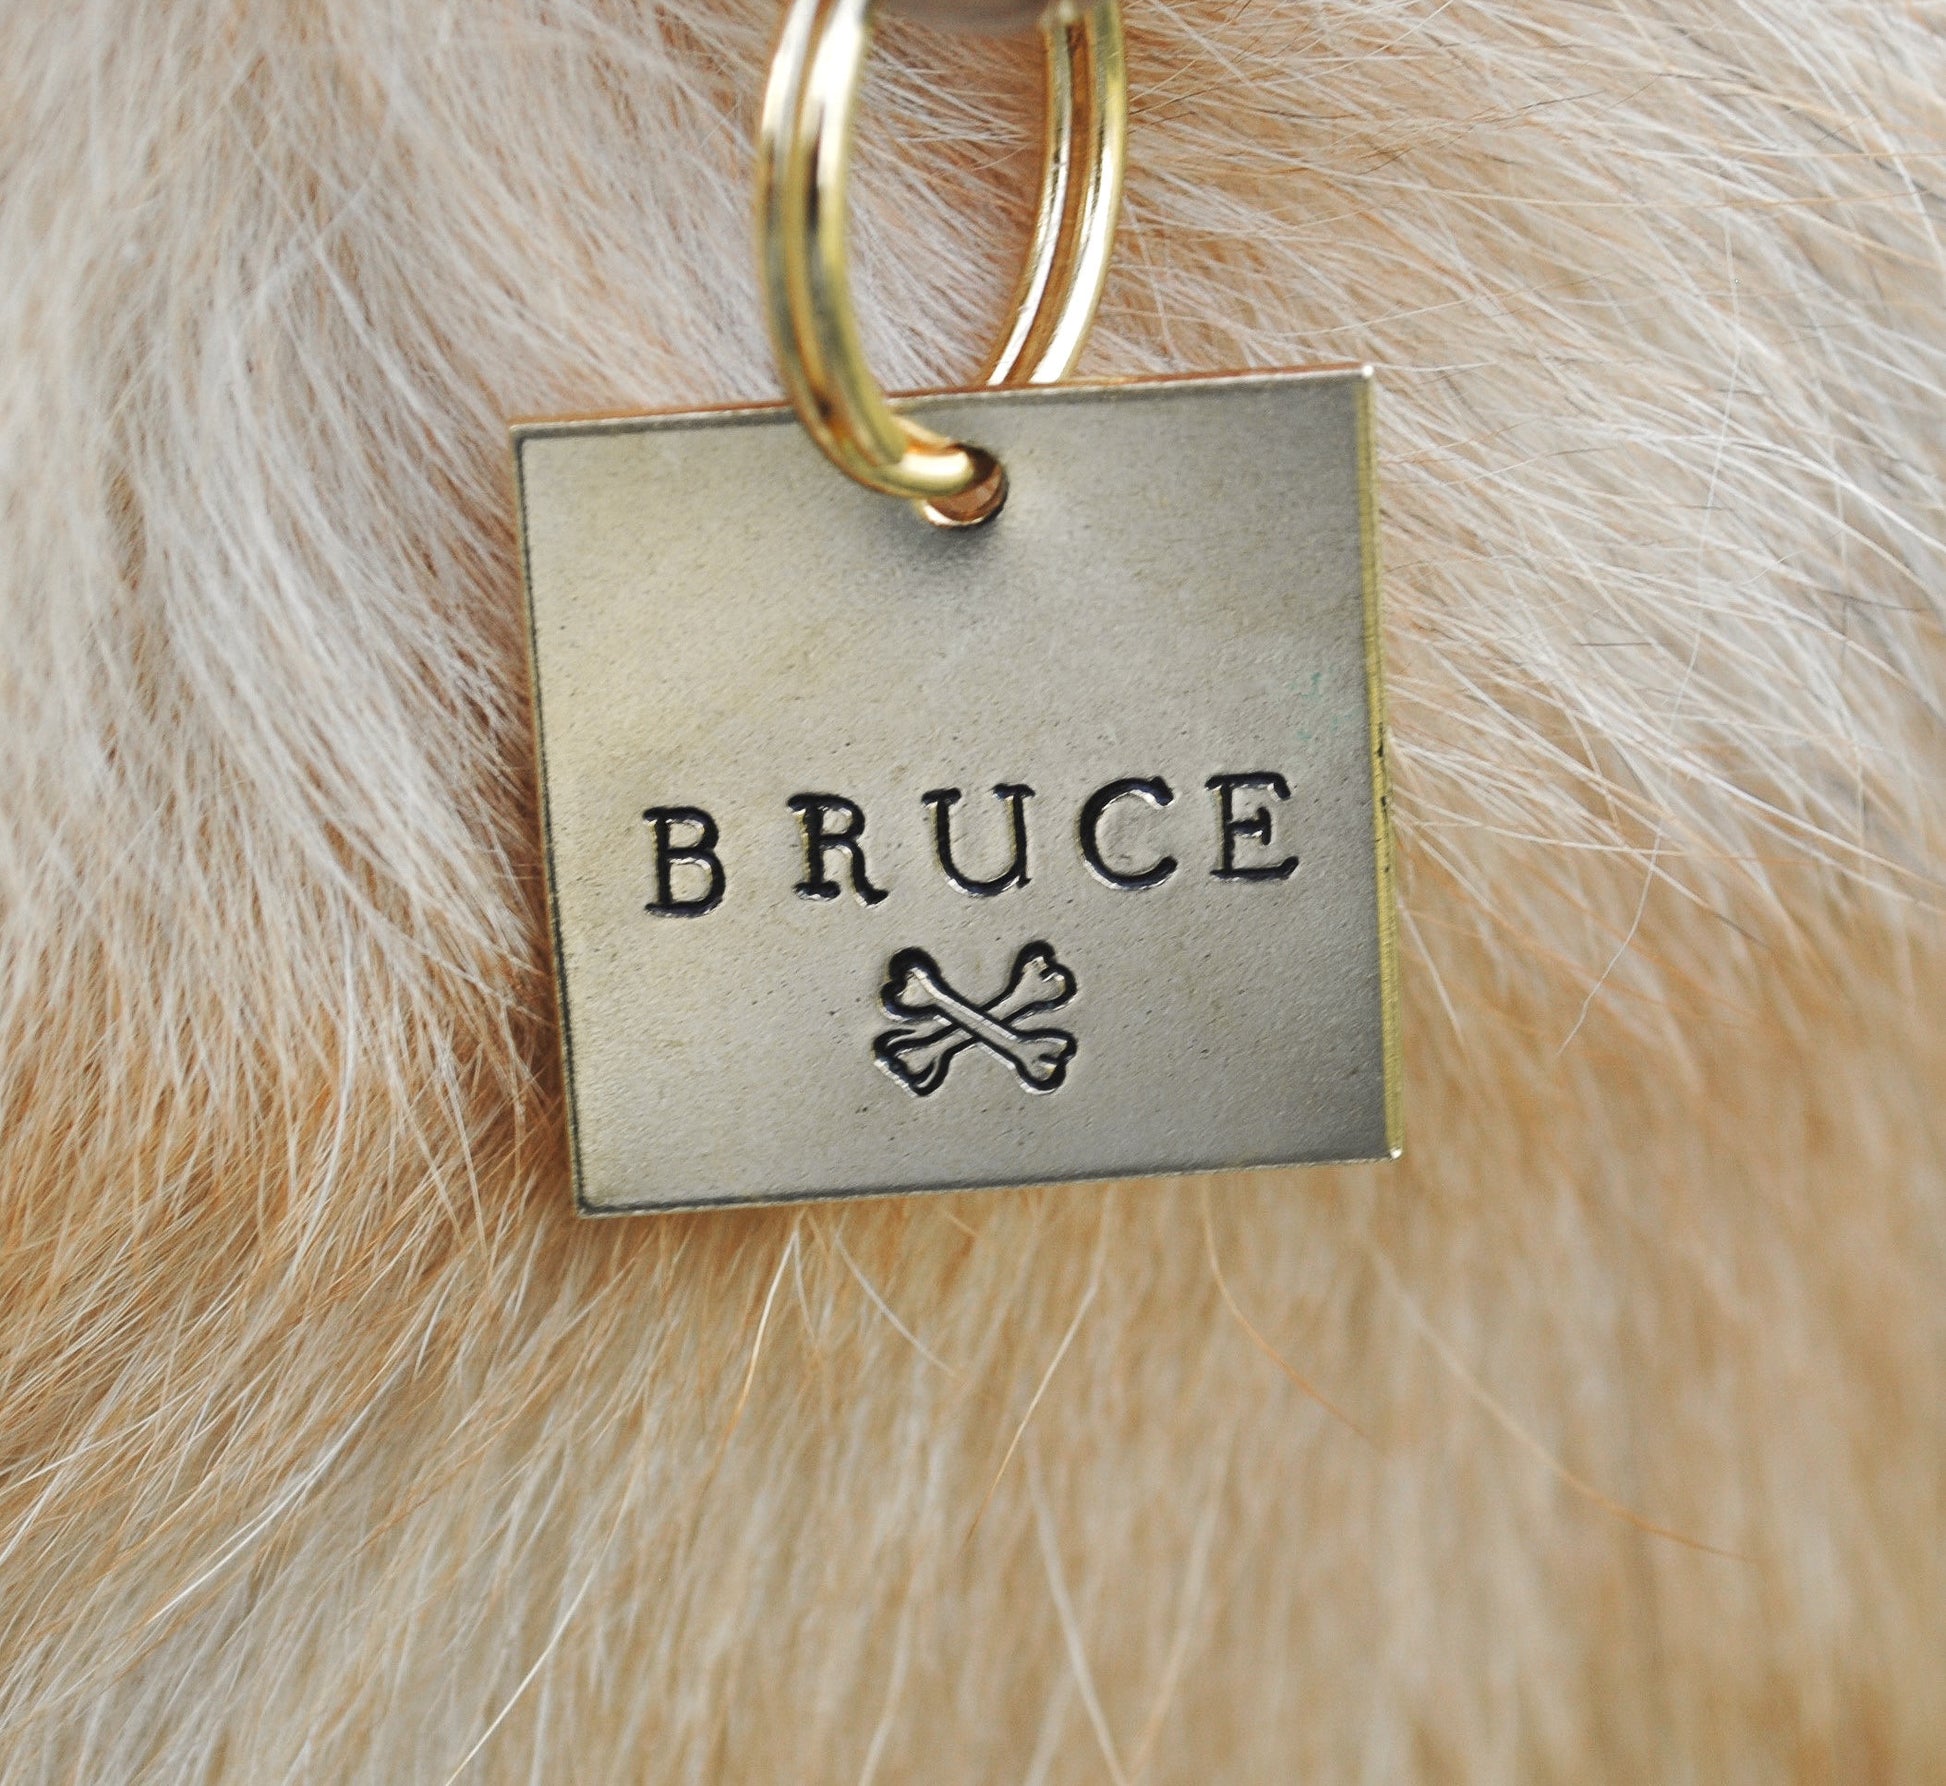 Personalized Dog Tag - Crossbones Hand Stamped Dog Tag - Personalized Pet ID - Dog Collar Tag - Custom Dog Tag - Pet ID Tag - Custom Cat Tag - Dog Lover Gift - Crossbones Dog Tag - Dog Gear - Dog Accessories - Pet Accessories